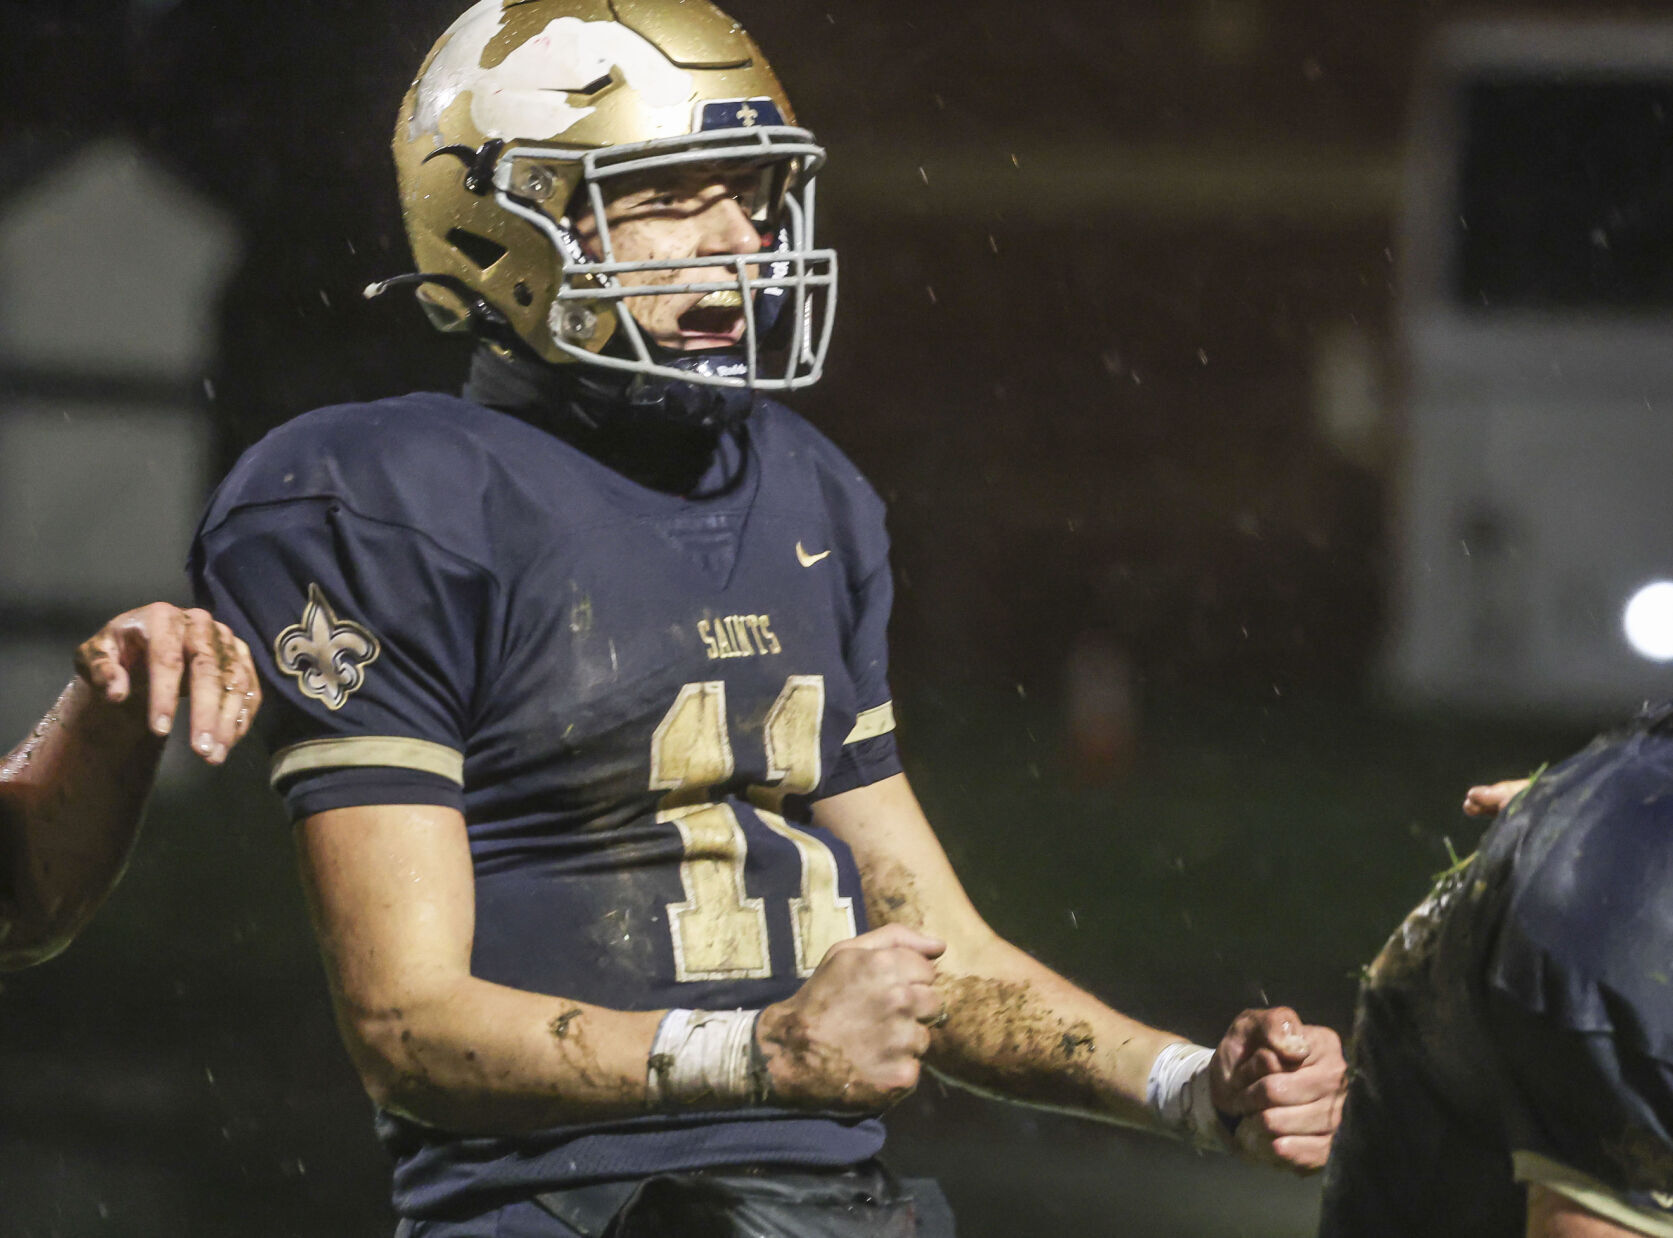 Colin Hayes Named Pantagraph Player of the Year for Central Catholic Football Team